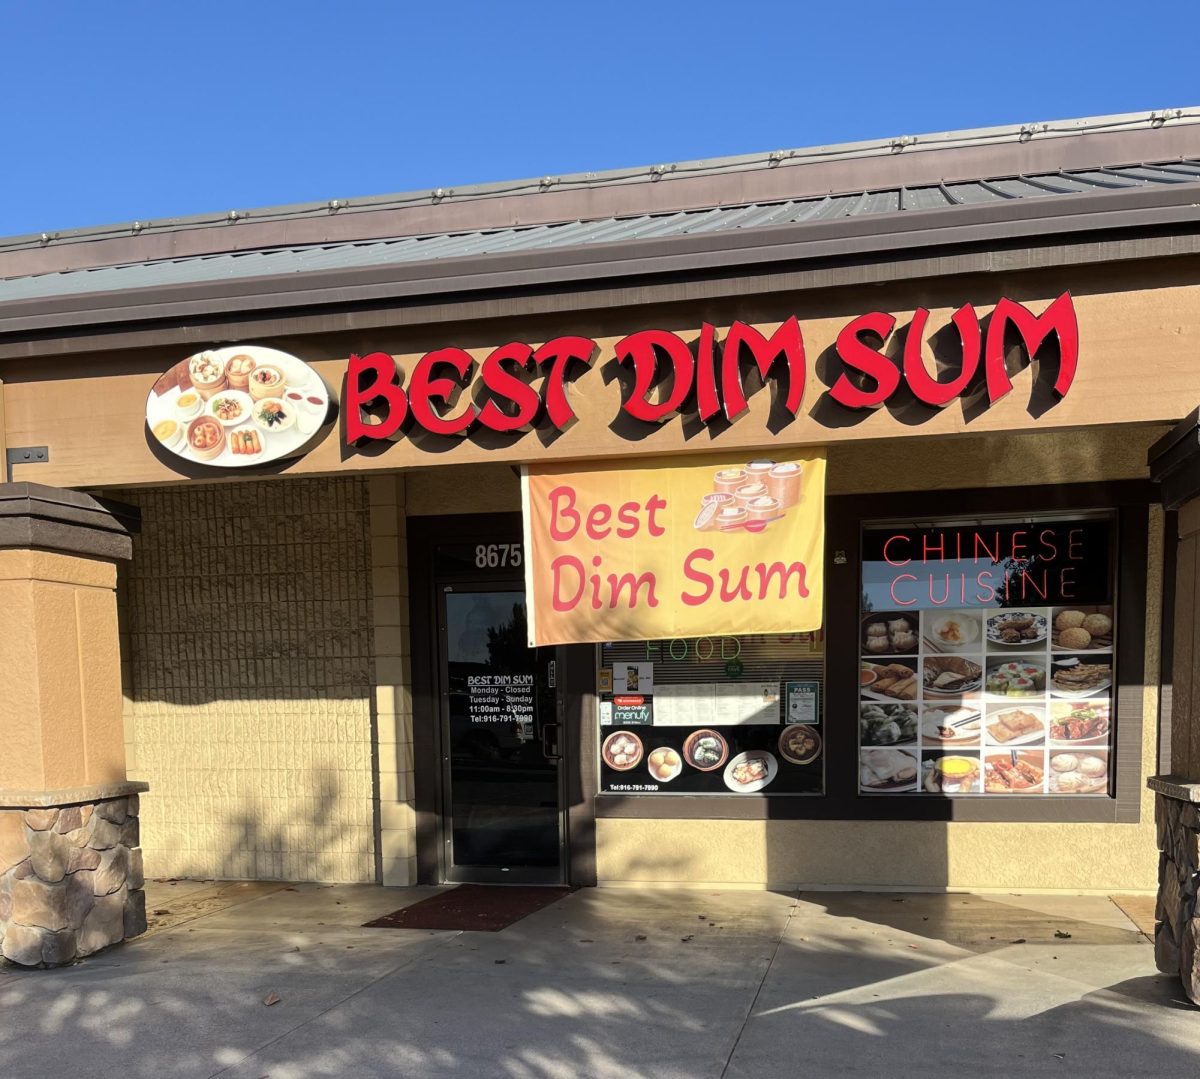 Food Review: Does the “Best Dim Sum” Really Have the Best Dim Sum?